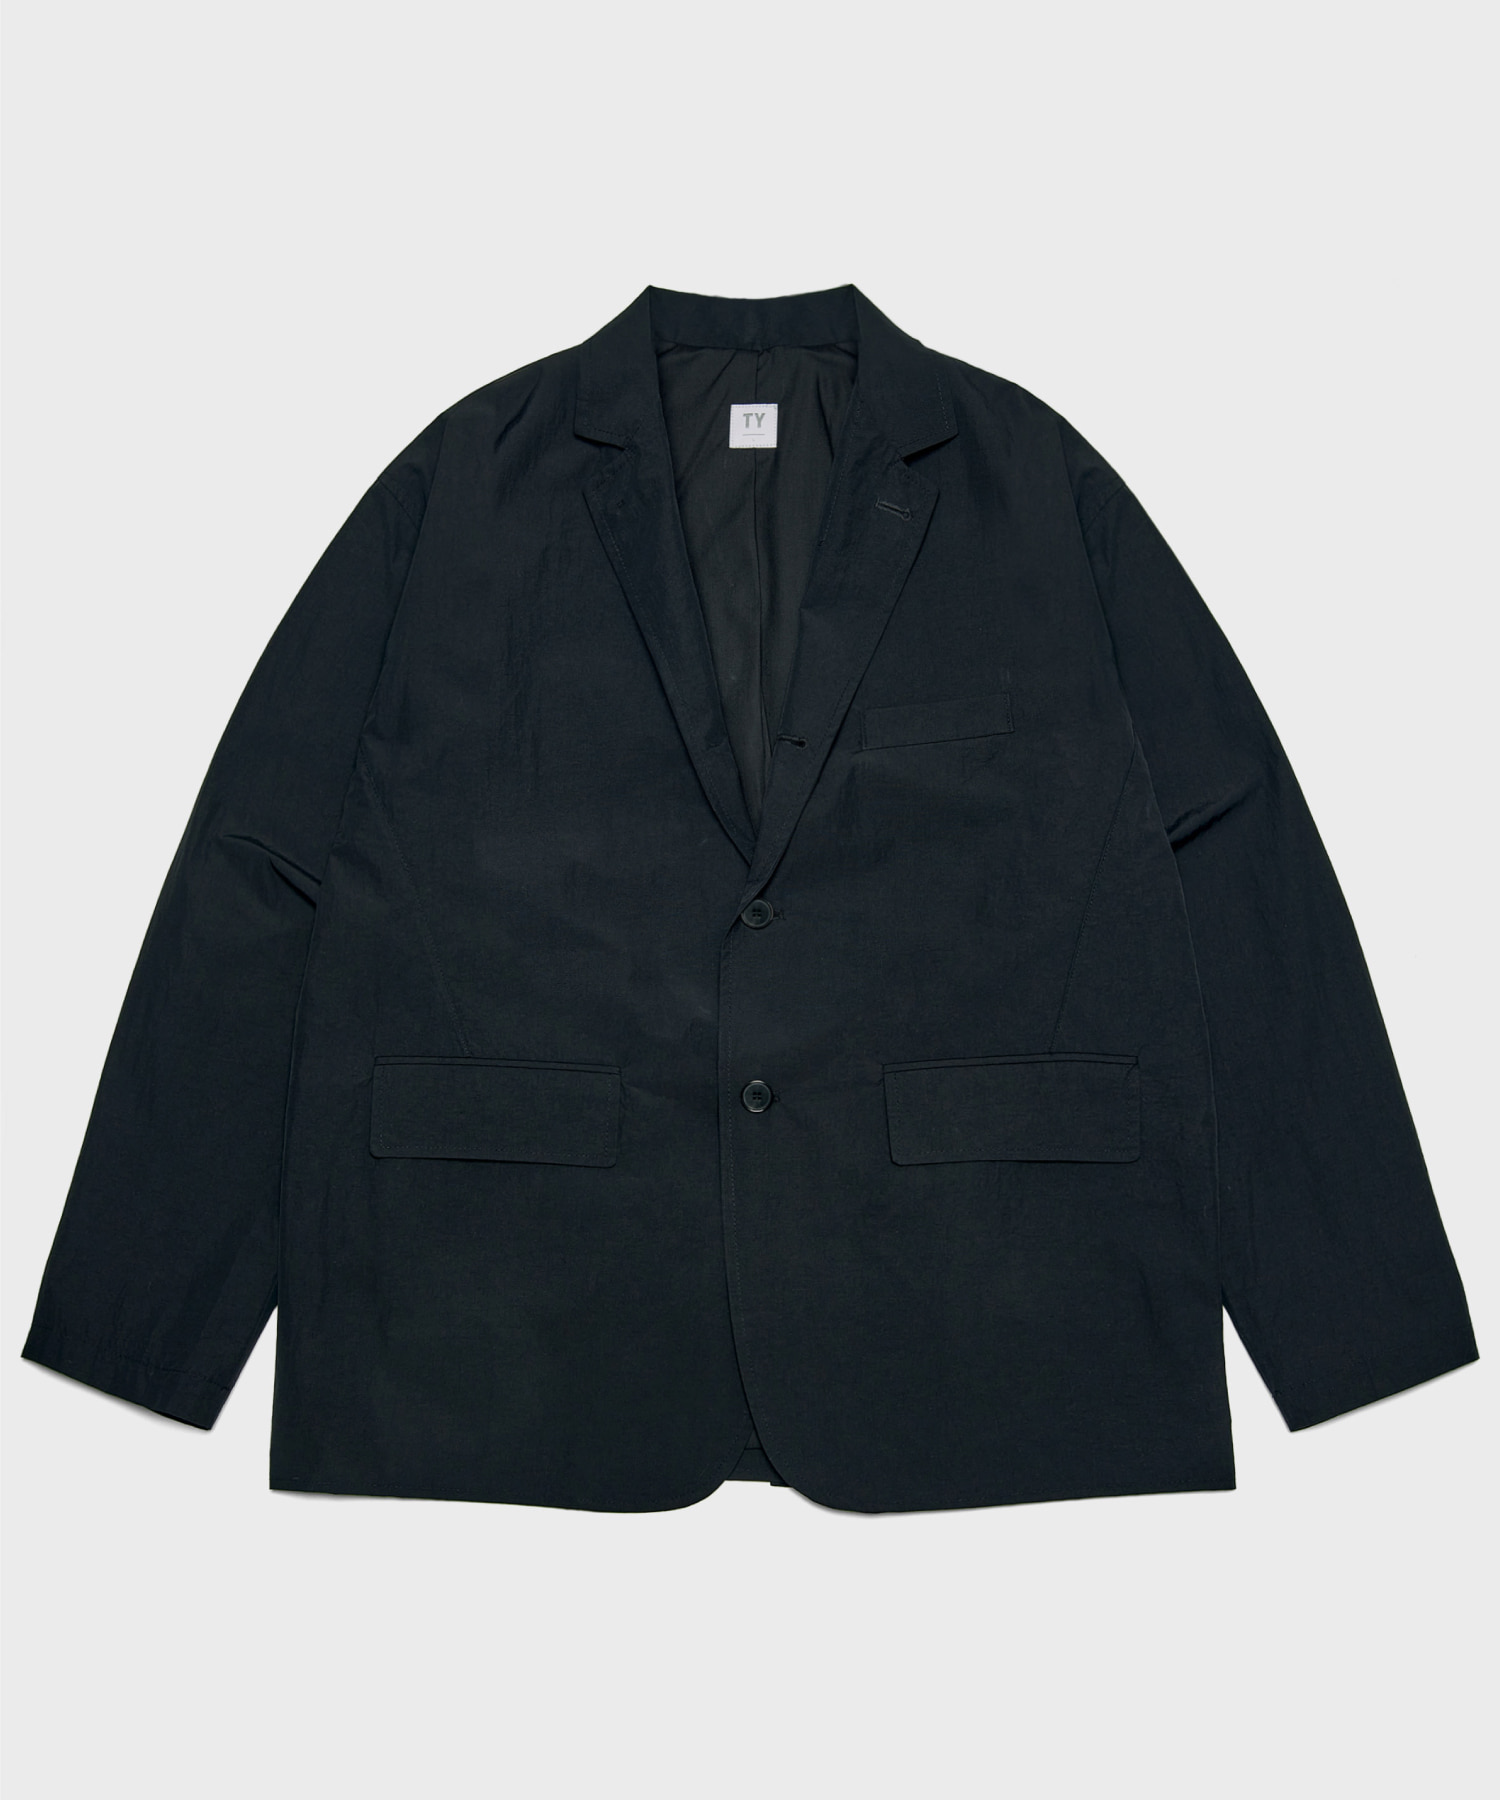 Office casual sports jacket_black